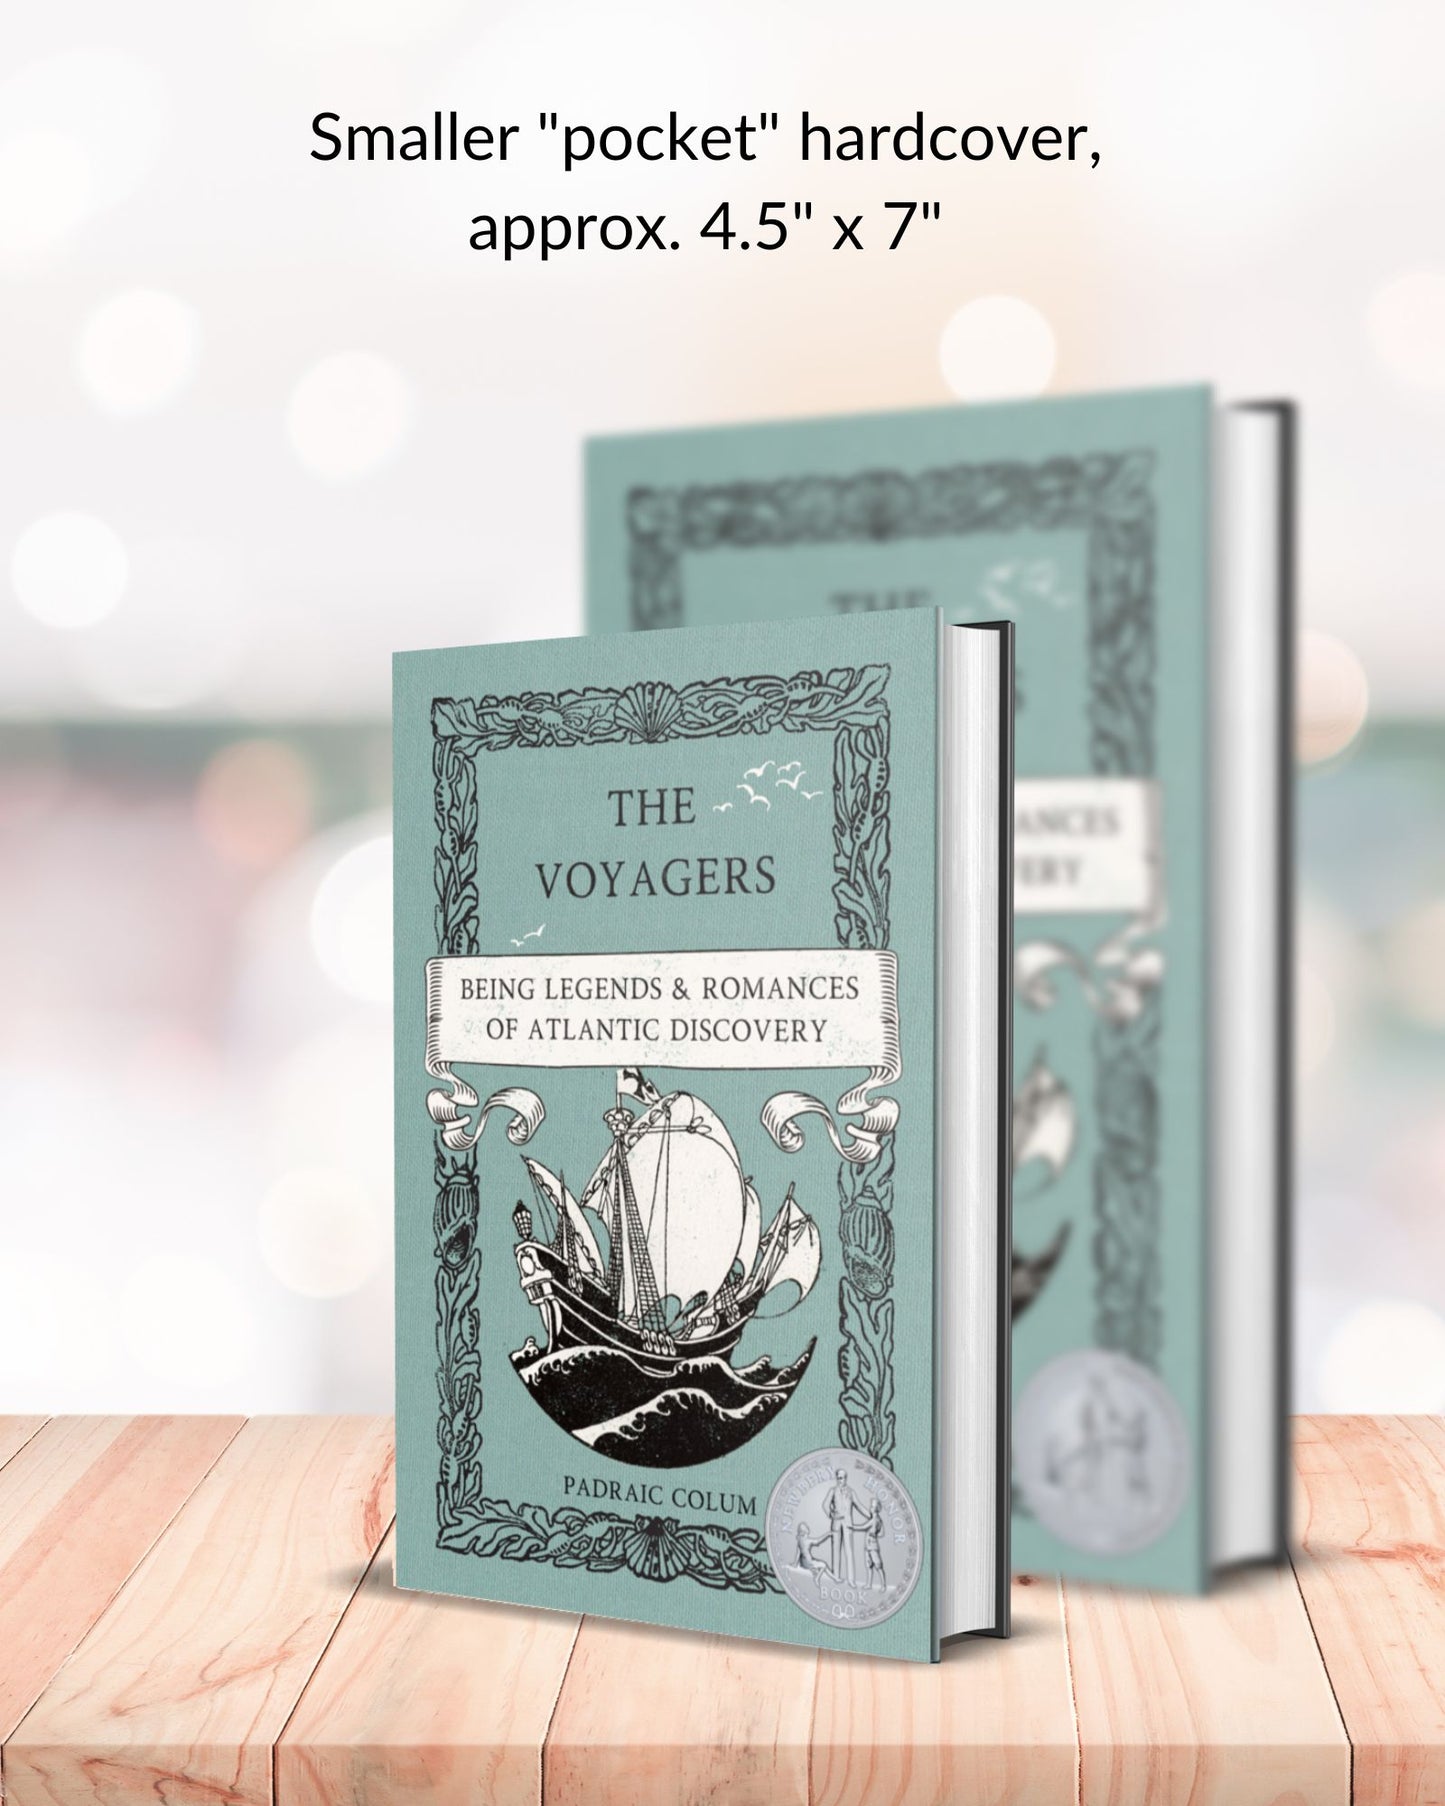 2 copies of hardbacks with the teal cover of "The Voyagers: Being Legends & Romances of Atlantic Discovery" to show the size differentiation of the smaller, pocket hardcover. The smaller pocket size is in front of the larger, both standing on blonde shelf in front of a blurred background.